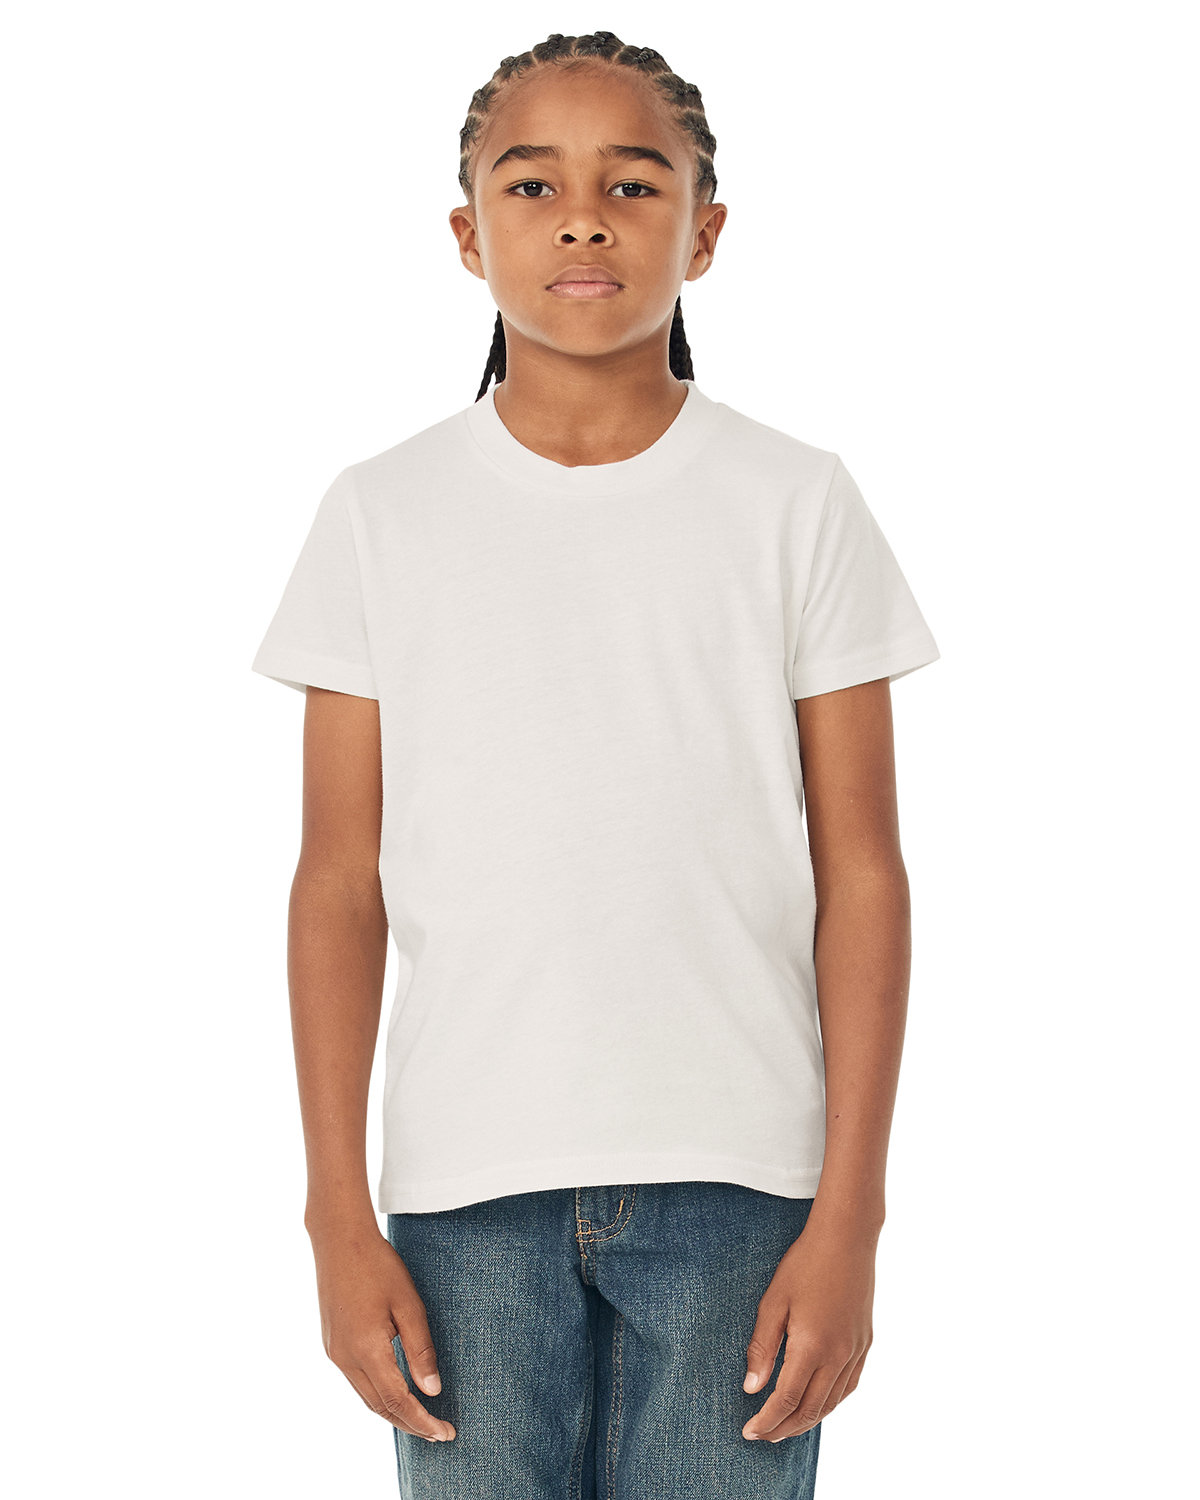 Bella + Canvas Youth Jersey T-Shirt vintage white 